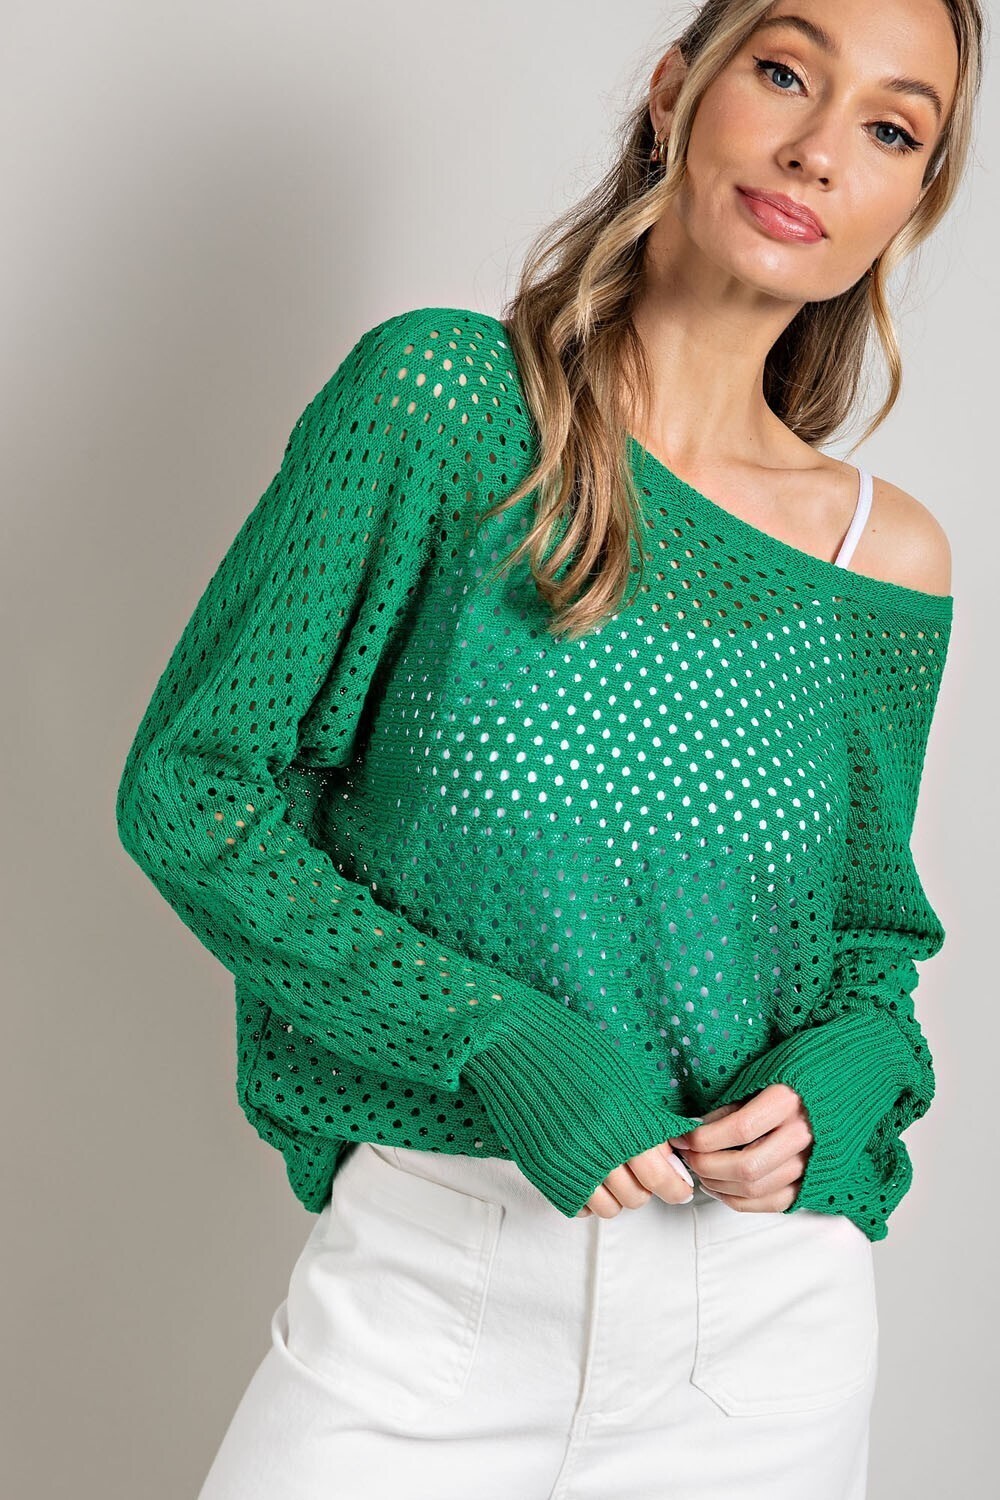 Kelly Green Eyelet Knit Light Sweater Cover Up